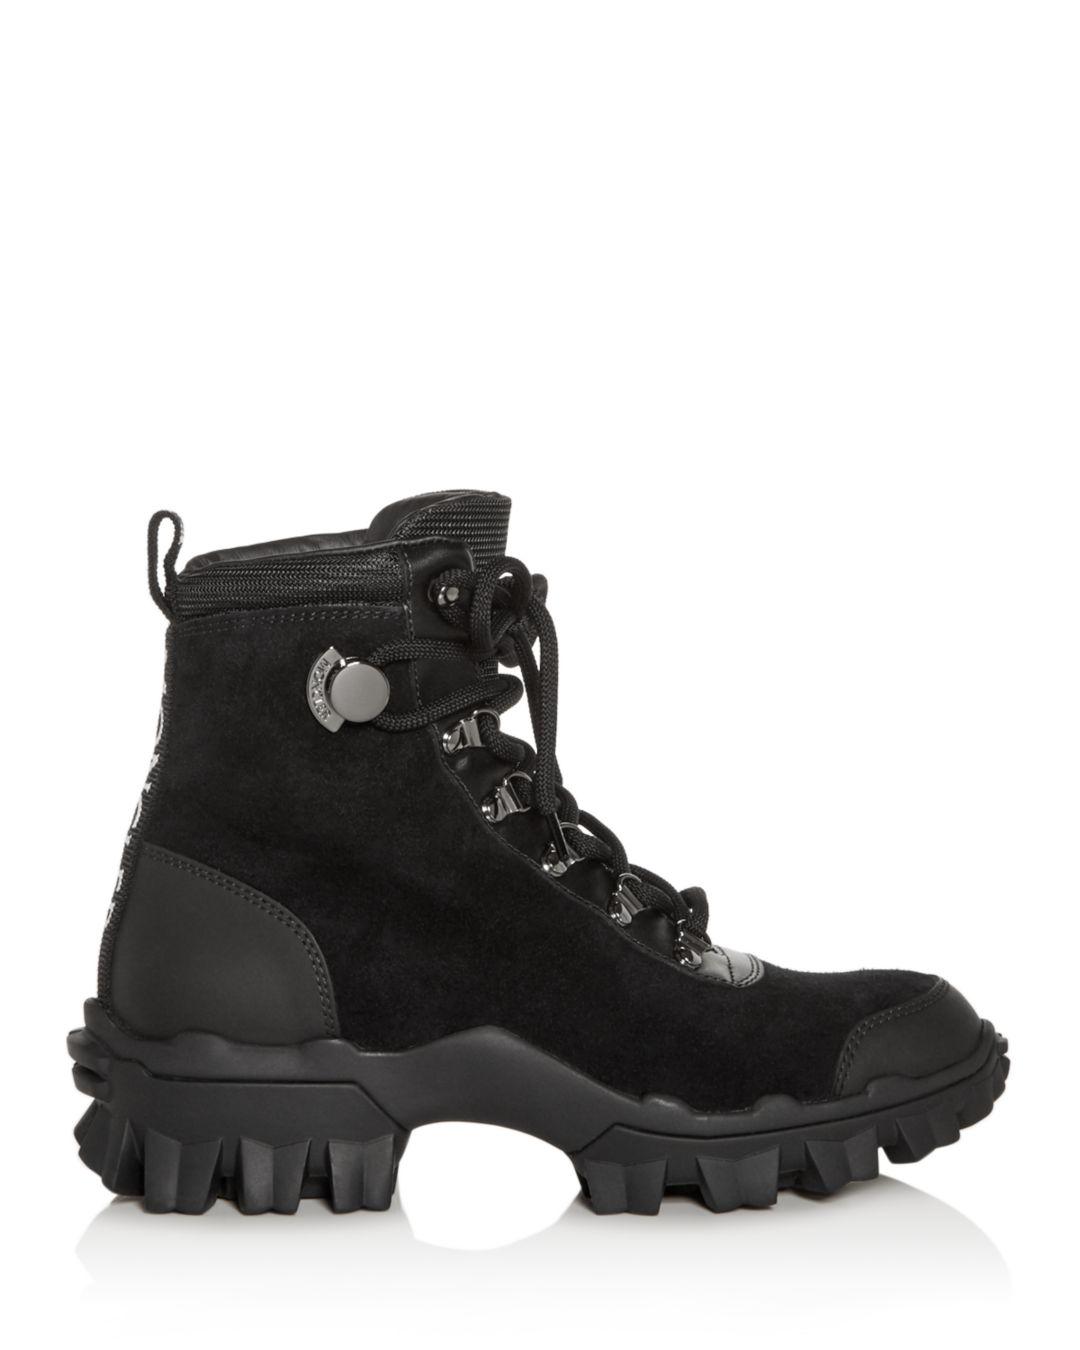 Moncler Leather Women's Helis Hiking Boots in Black - Lyst